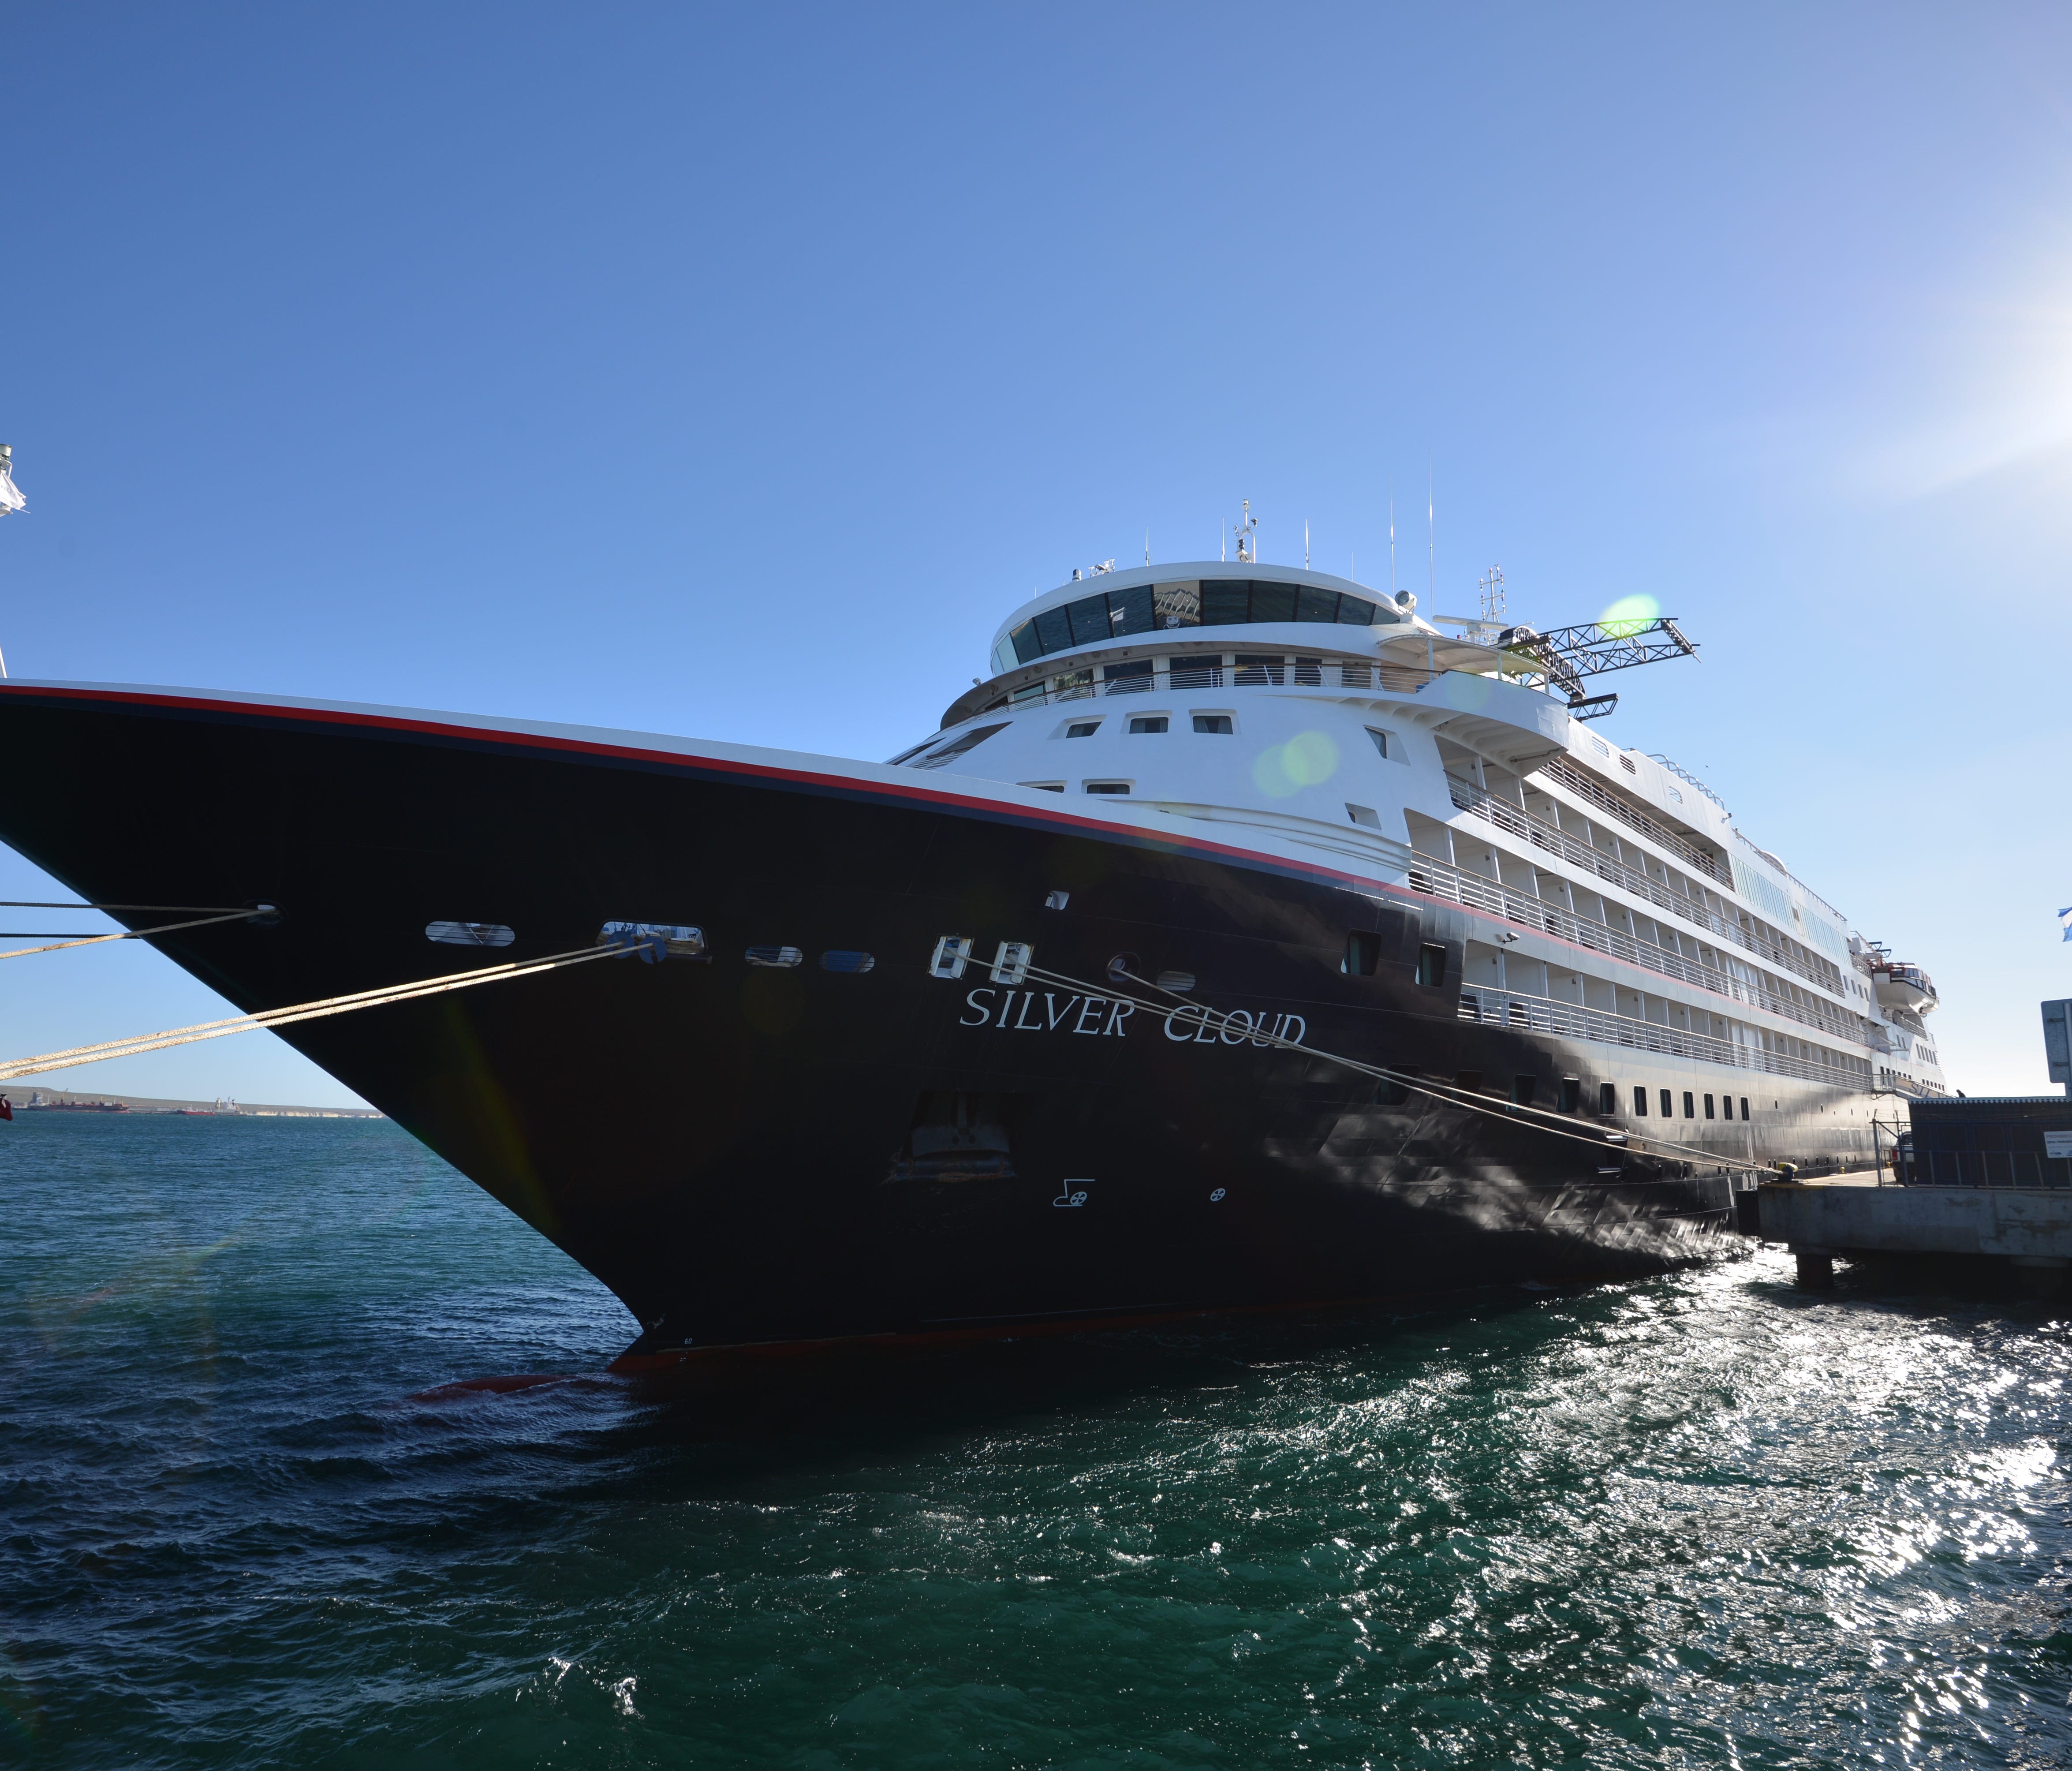 Call it the new queen of the polar regions. Silversea Cruises' 23-year-old Silver Cloud has just emerged from a massive makeover in dry dock designed to transform it into the most elegant polar exploration vessel at sea.